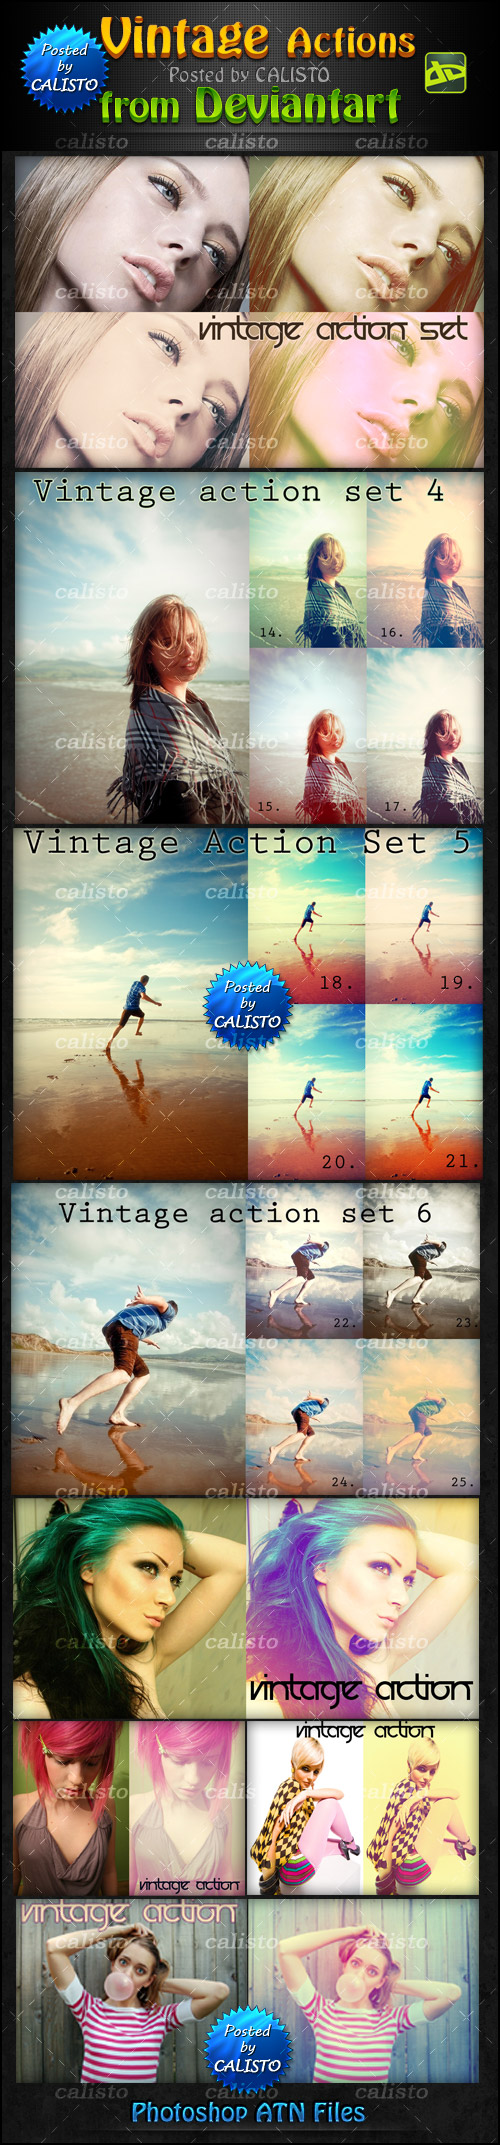 Vintage Actions